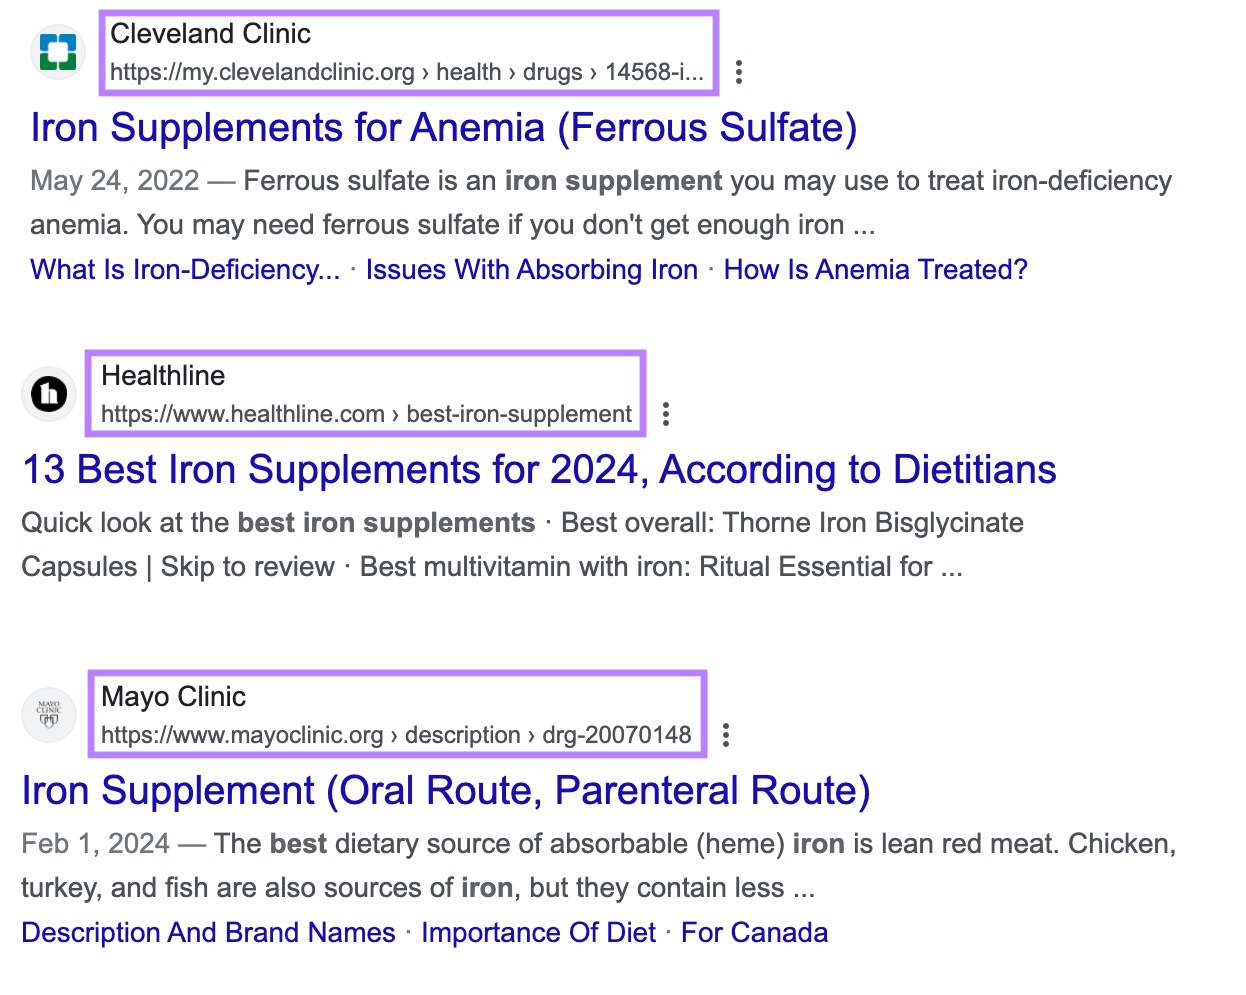 Top-ranking results for "best robust  supplement" are informational pages from well-established wellness  websites